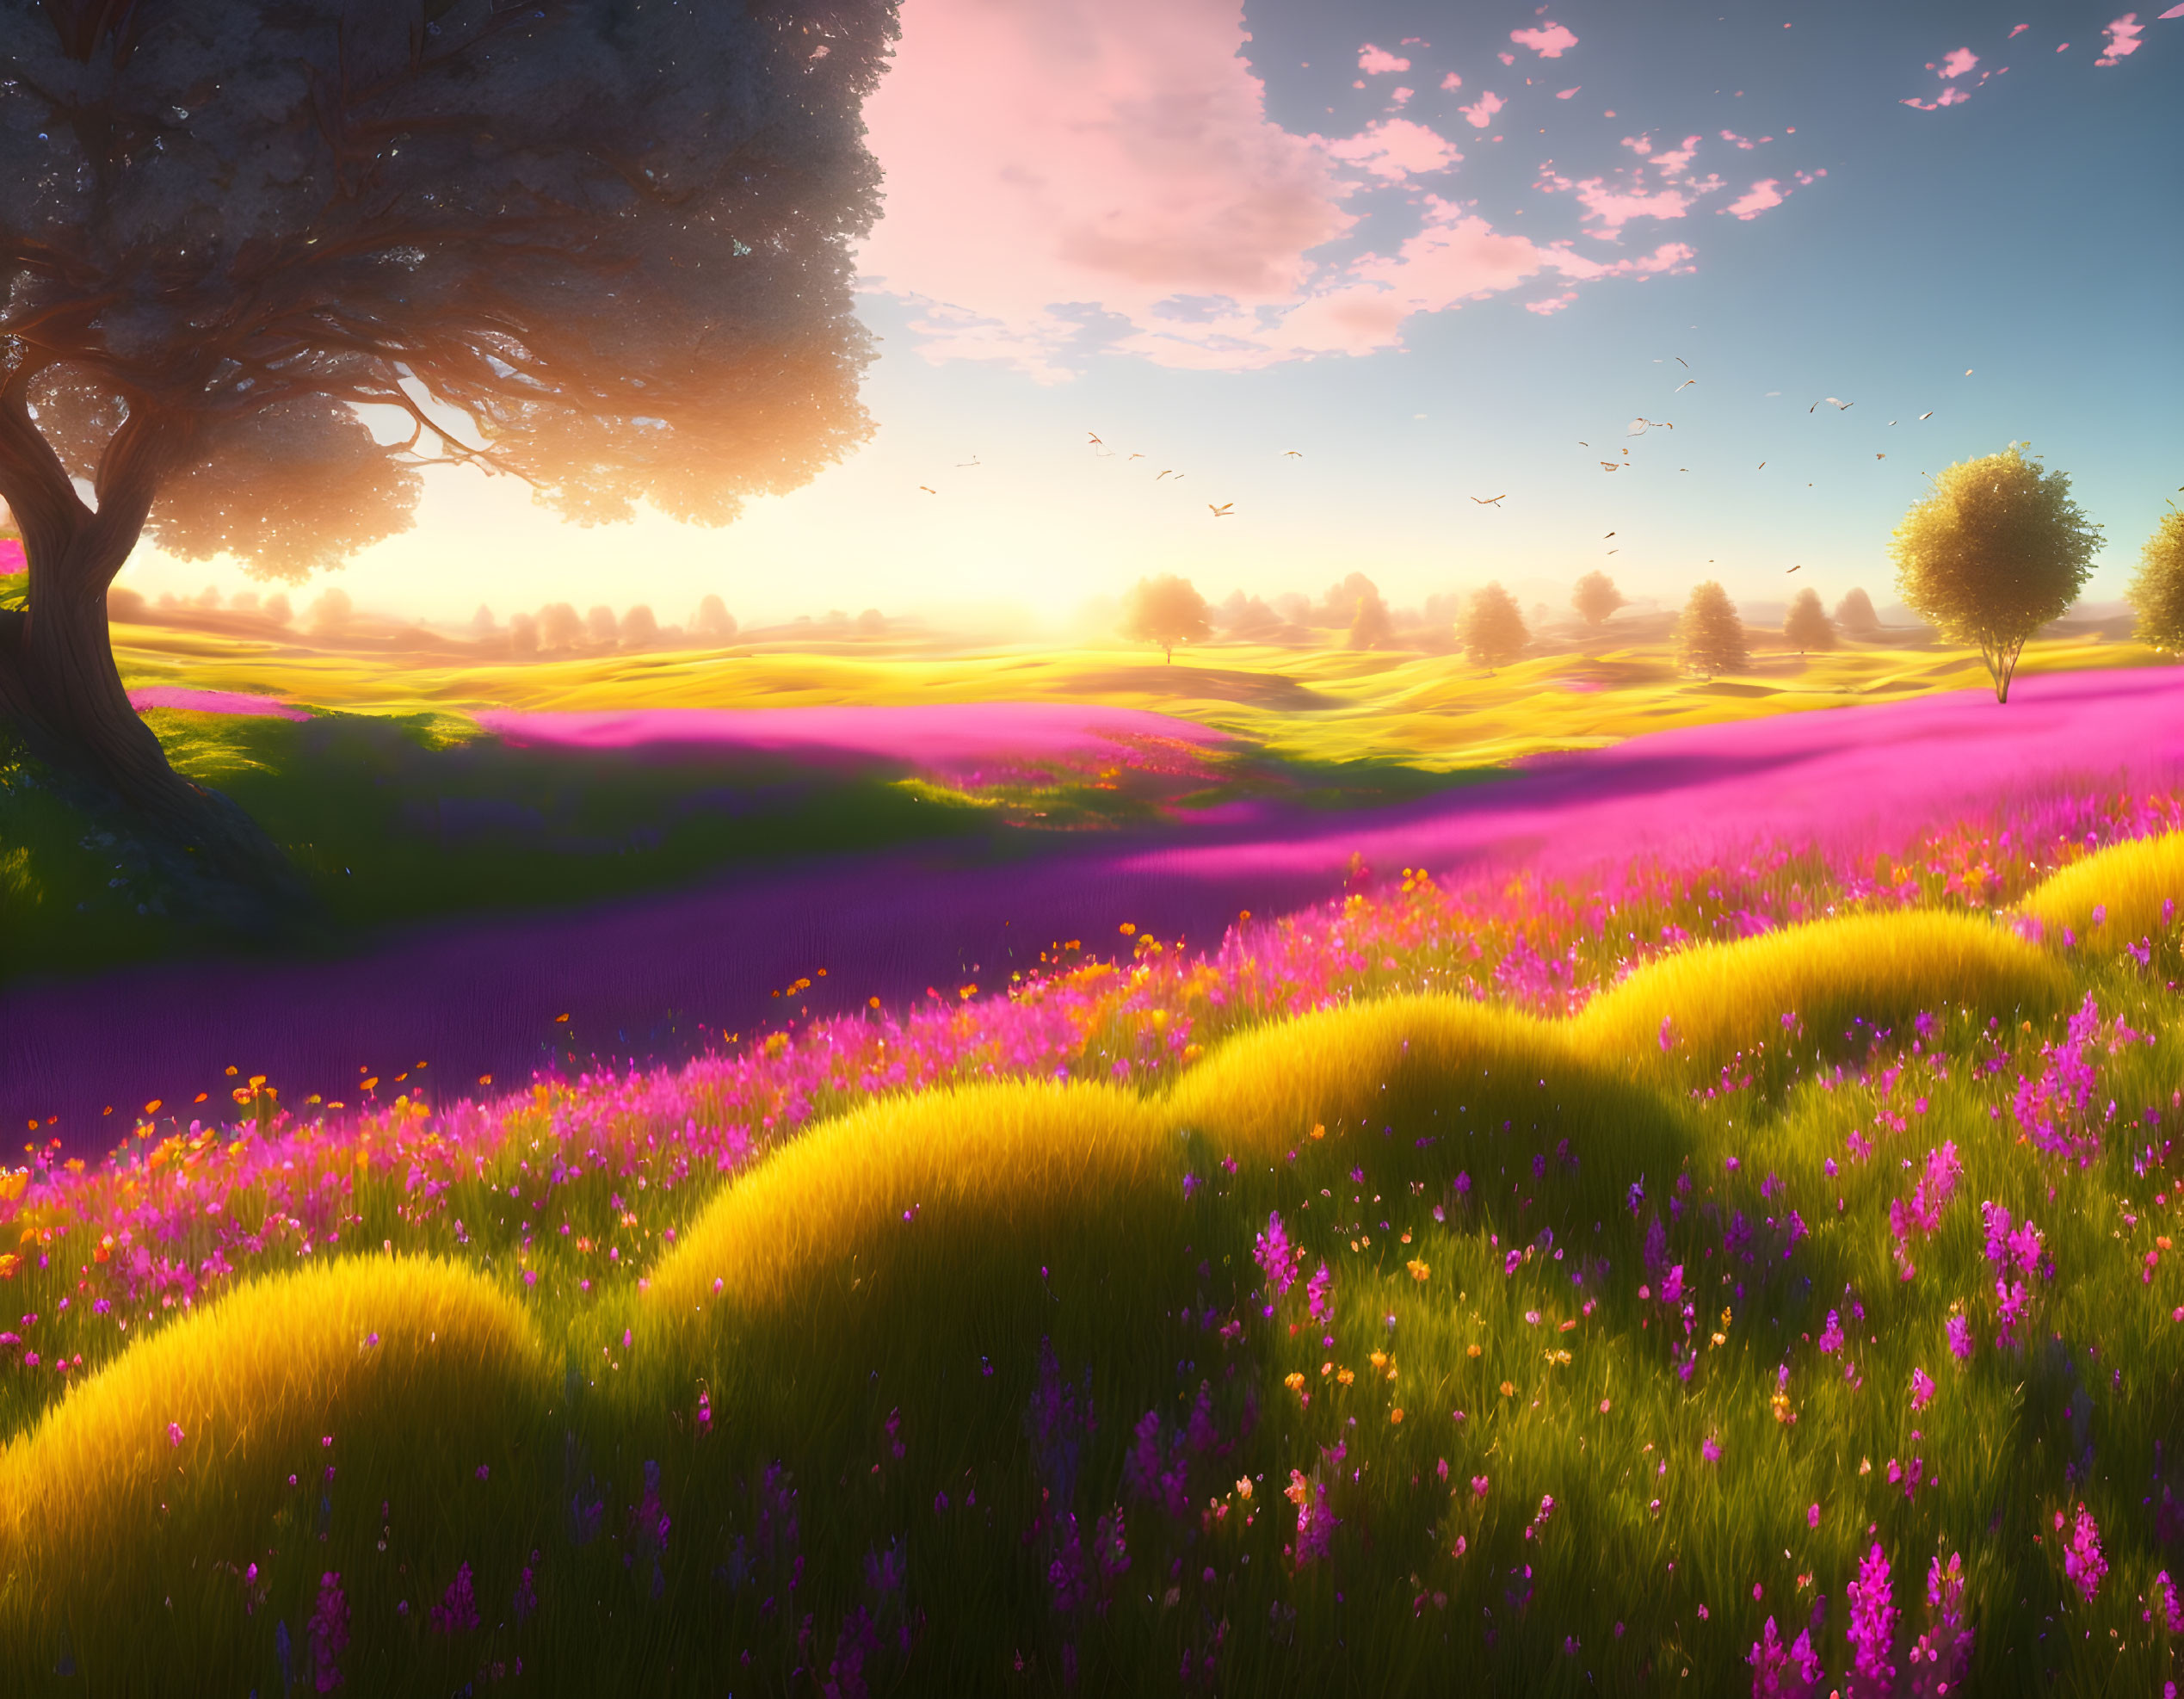 Colorful digital artwork of rolling hills with flowers, lone tree, and sunset sky